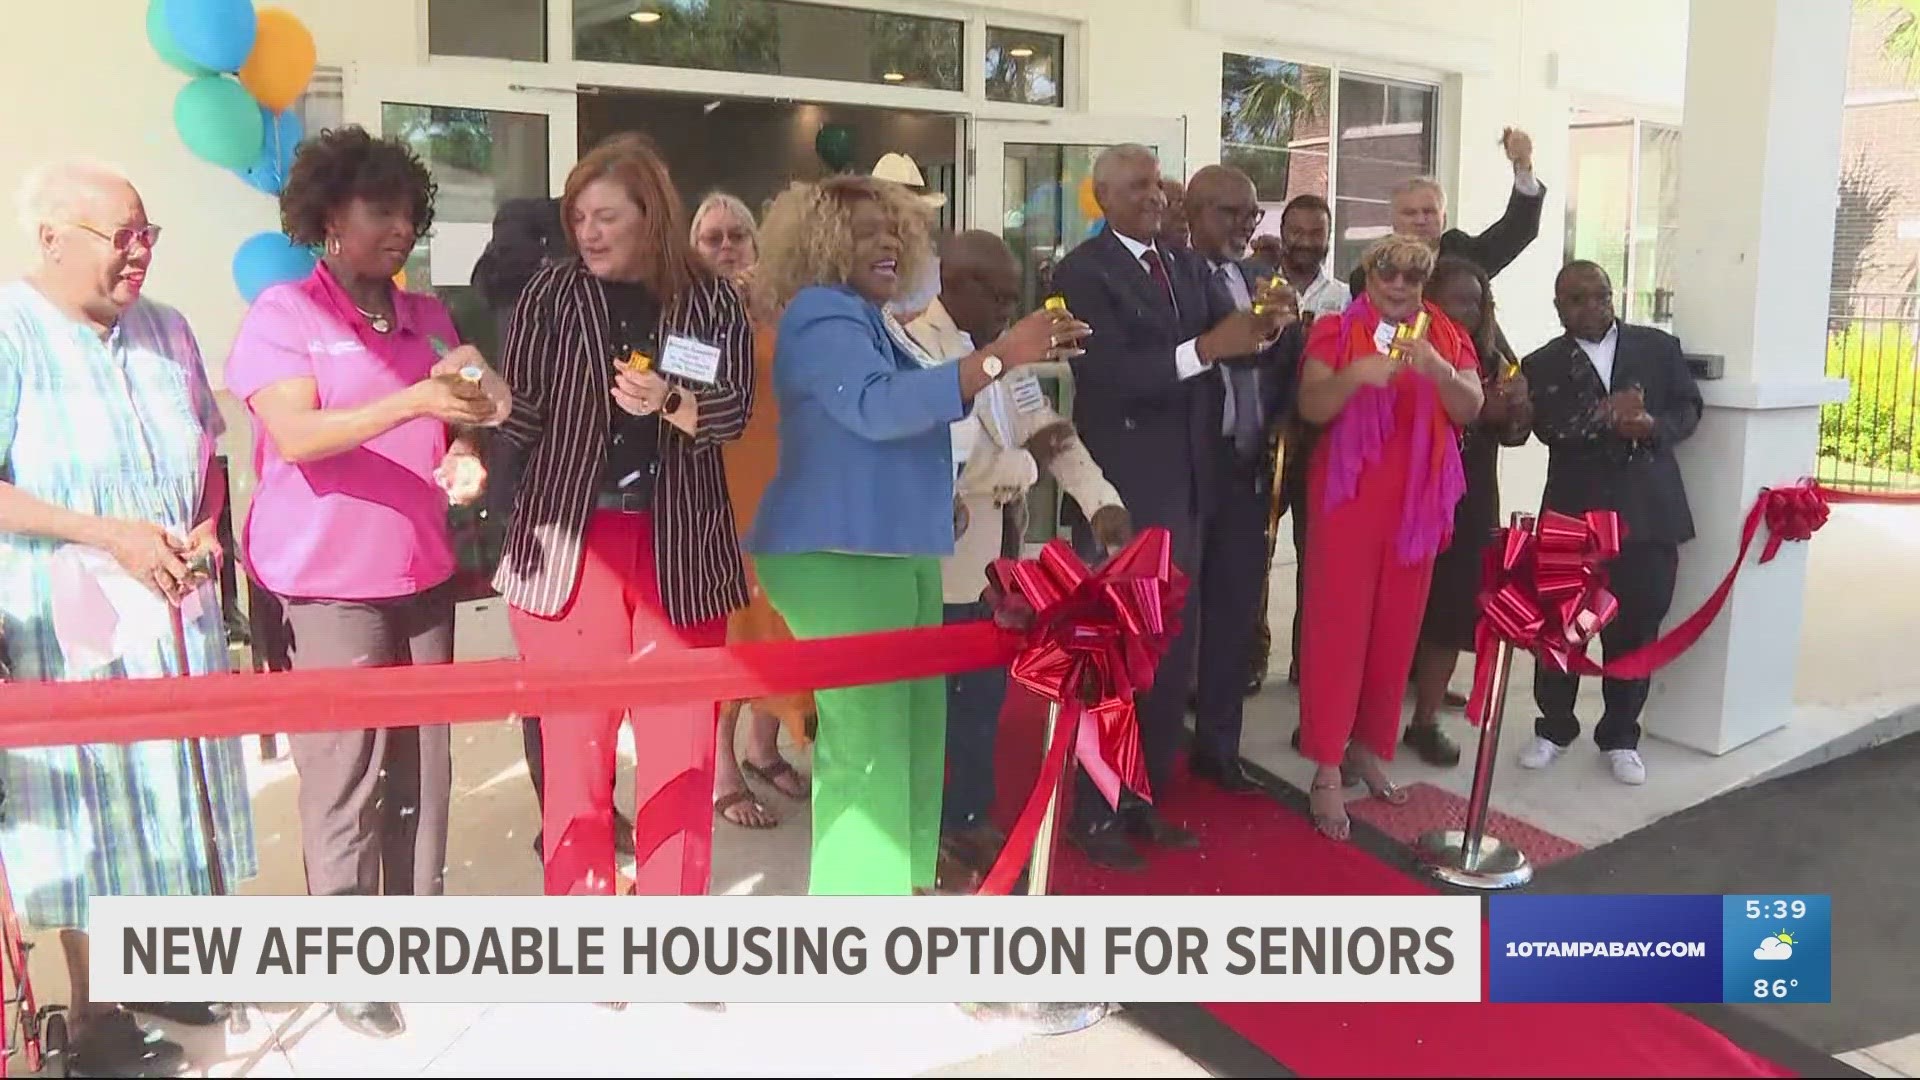 The new housing development is located in South St. Pete.